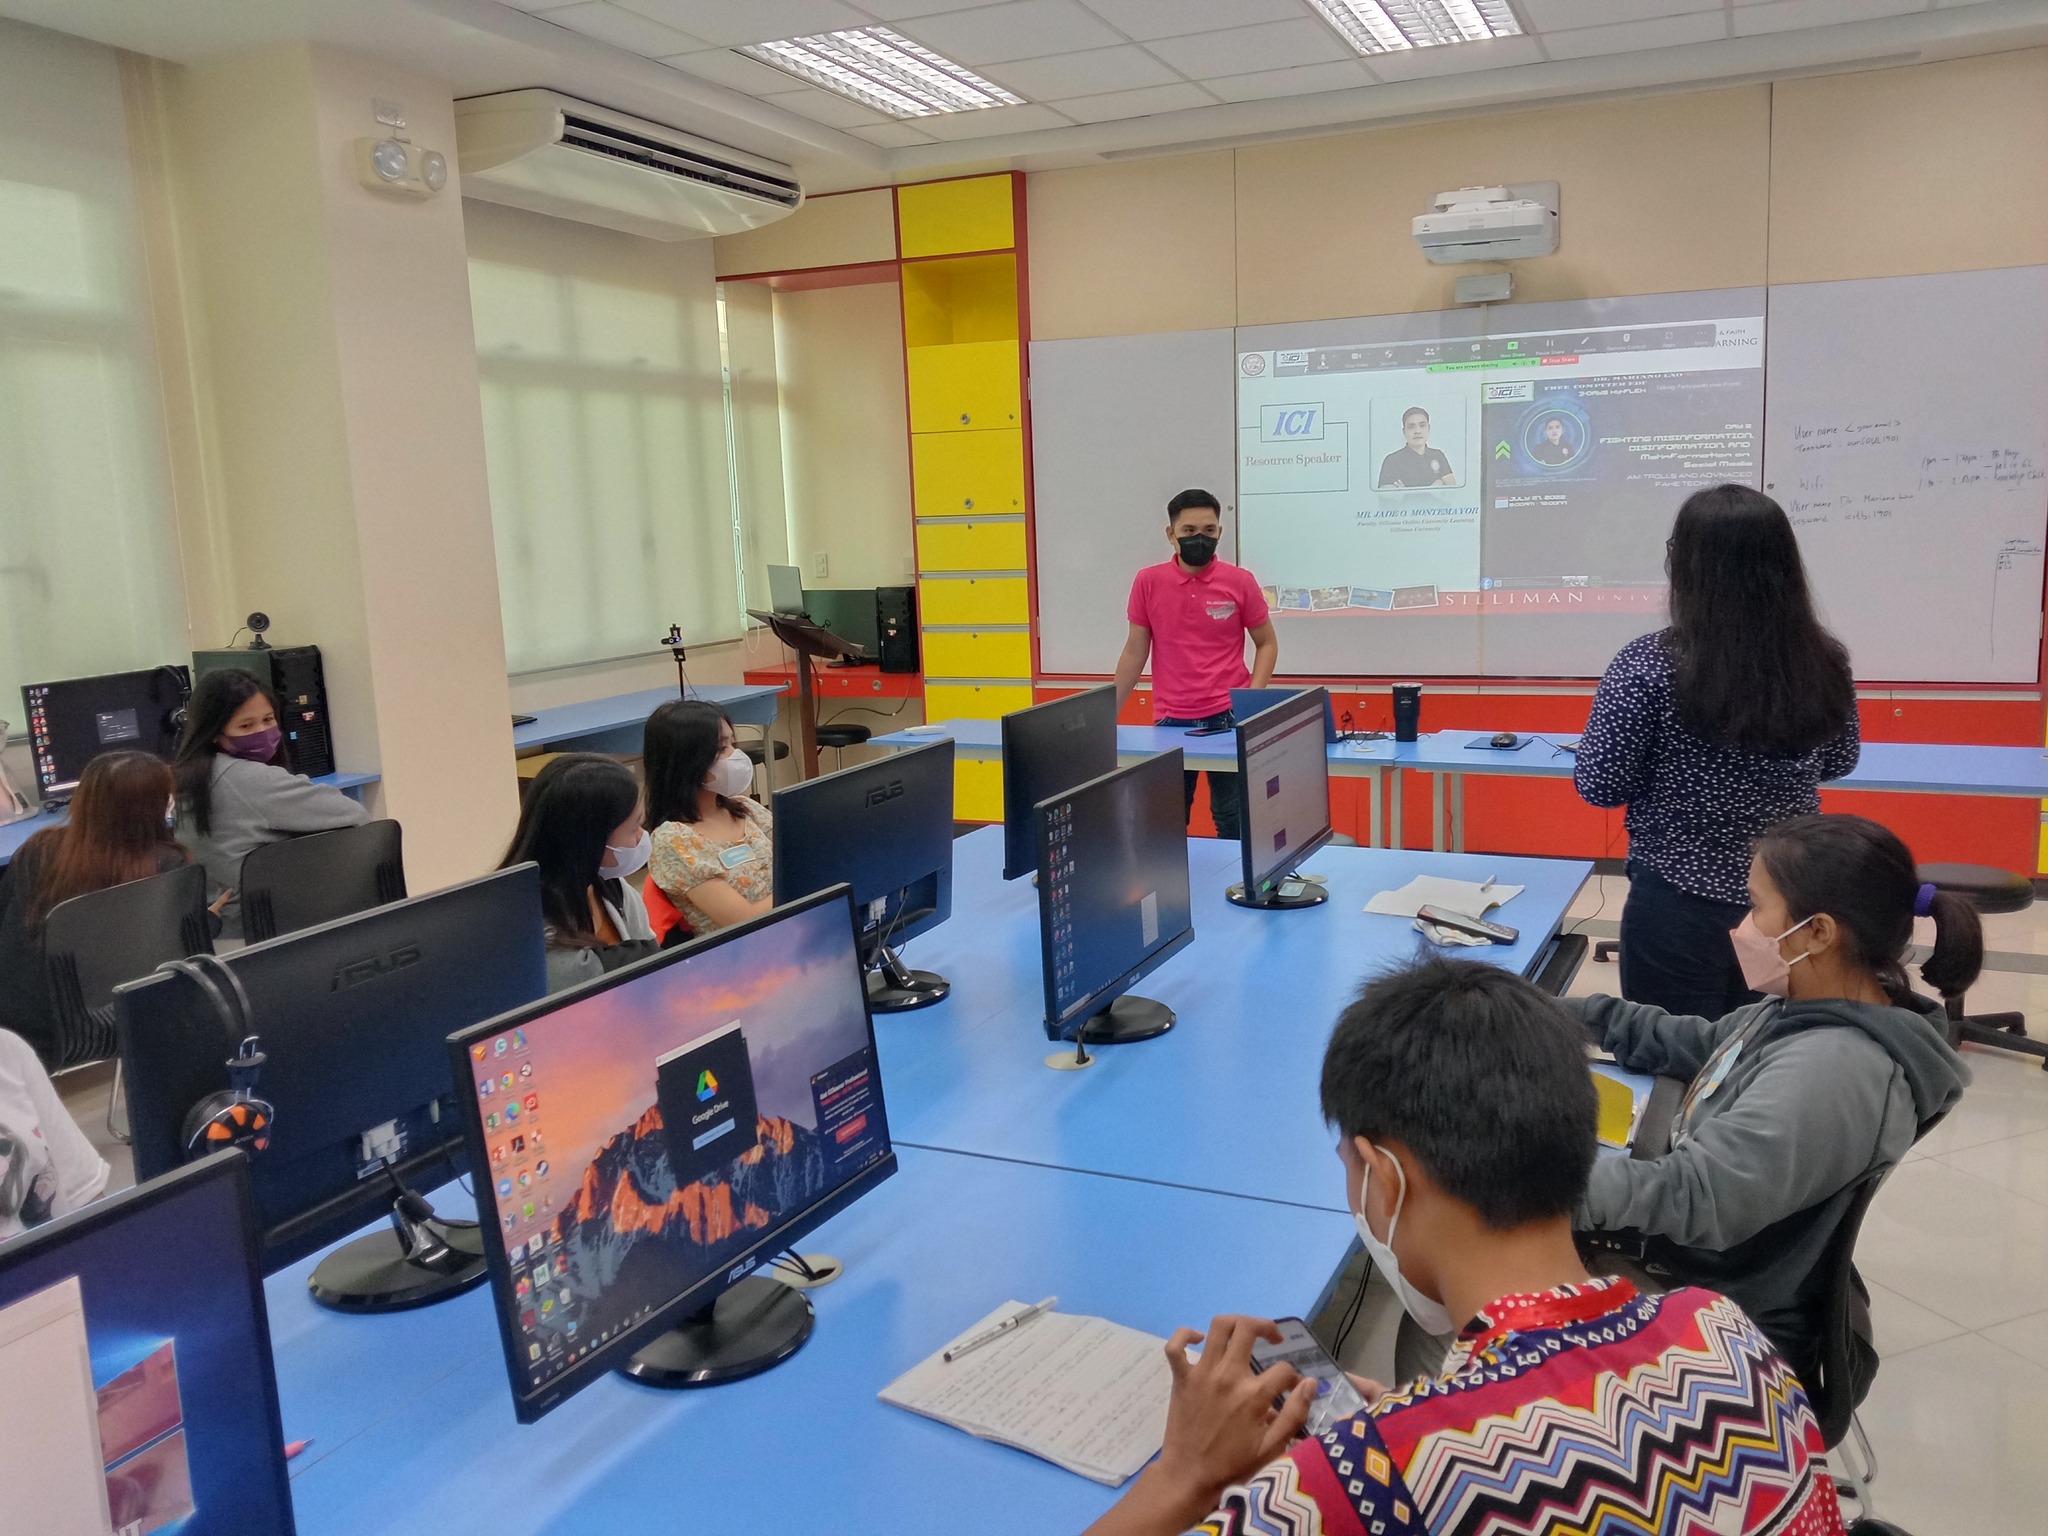 SU-Lao ICI Lab trains youth to fight false information online